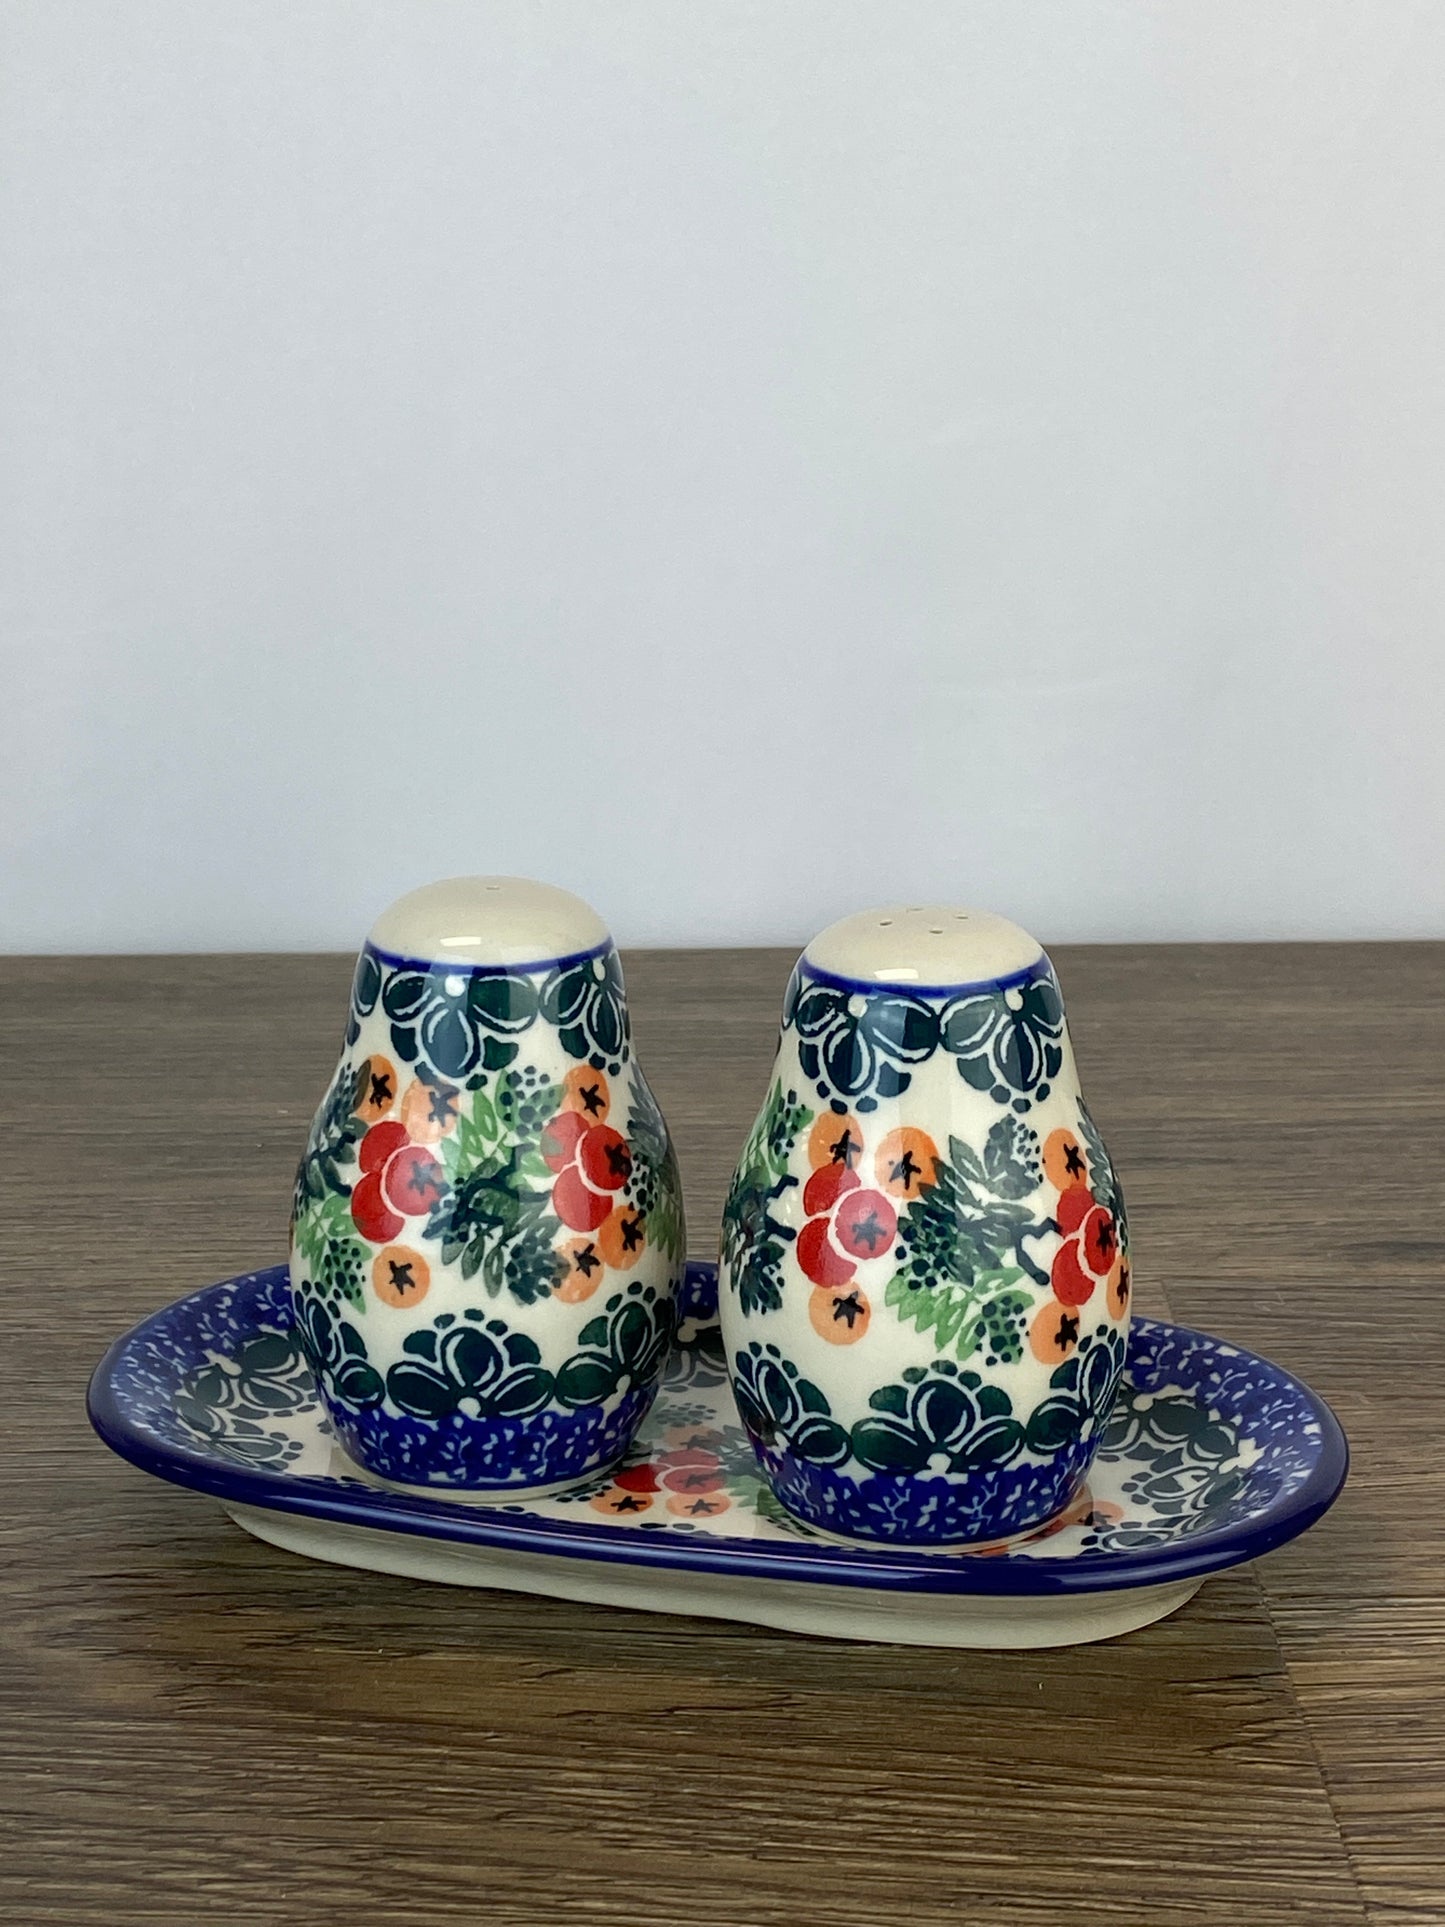 SALE Salt and Pepper Set with Tray - Shape 131 - Pattern 1414